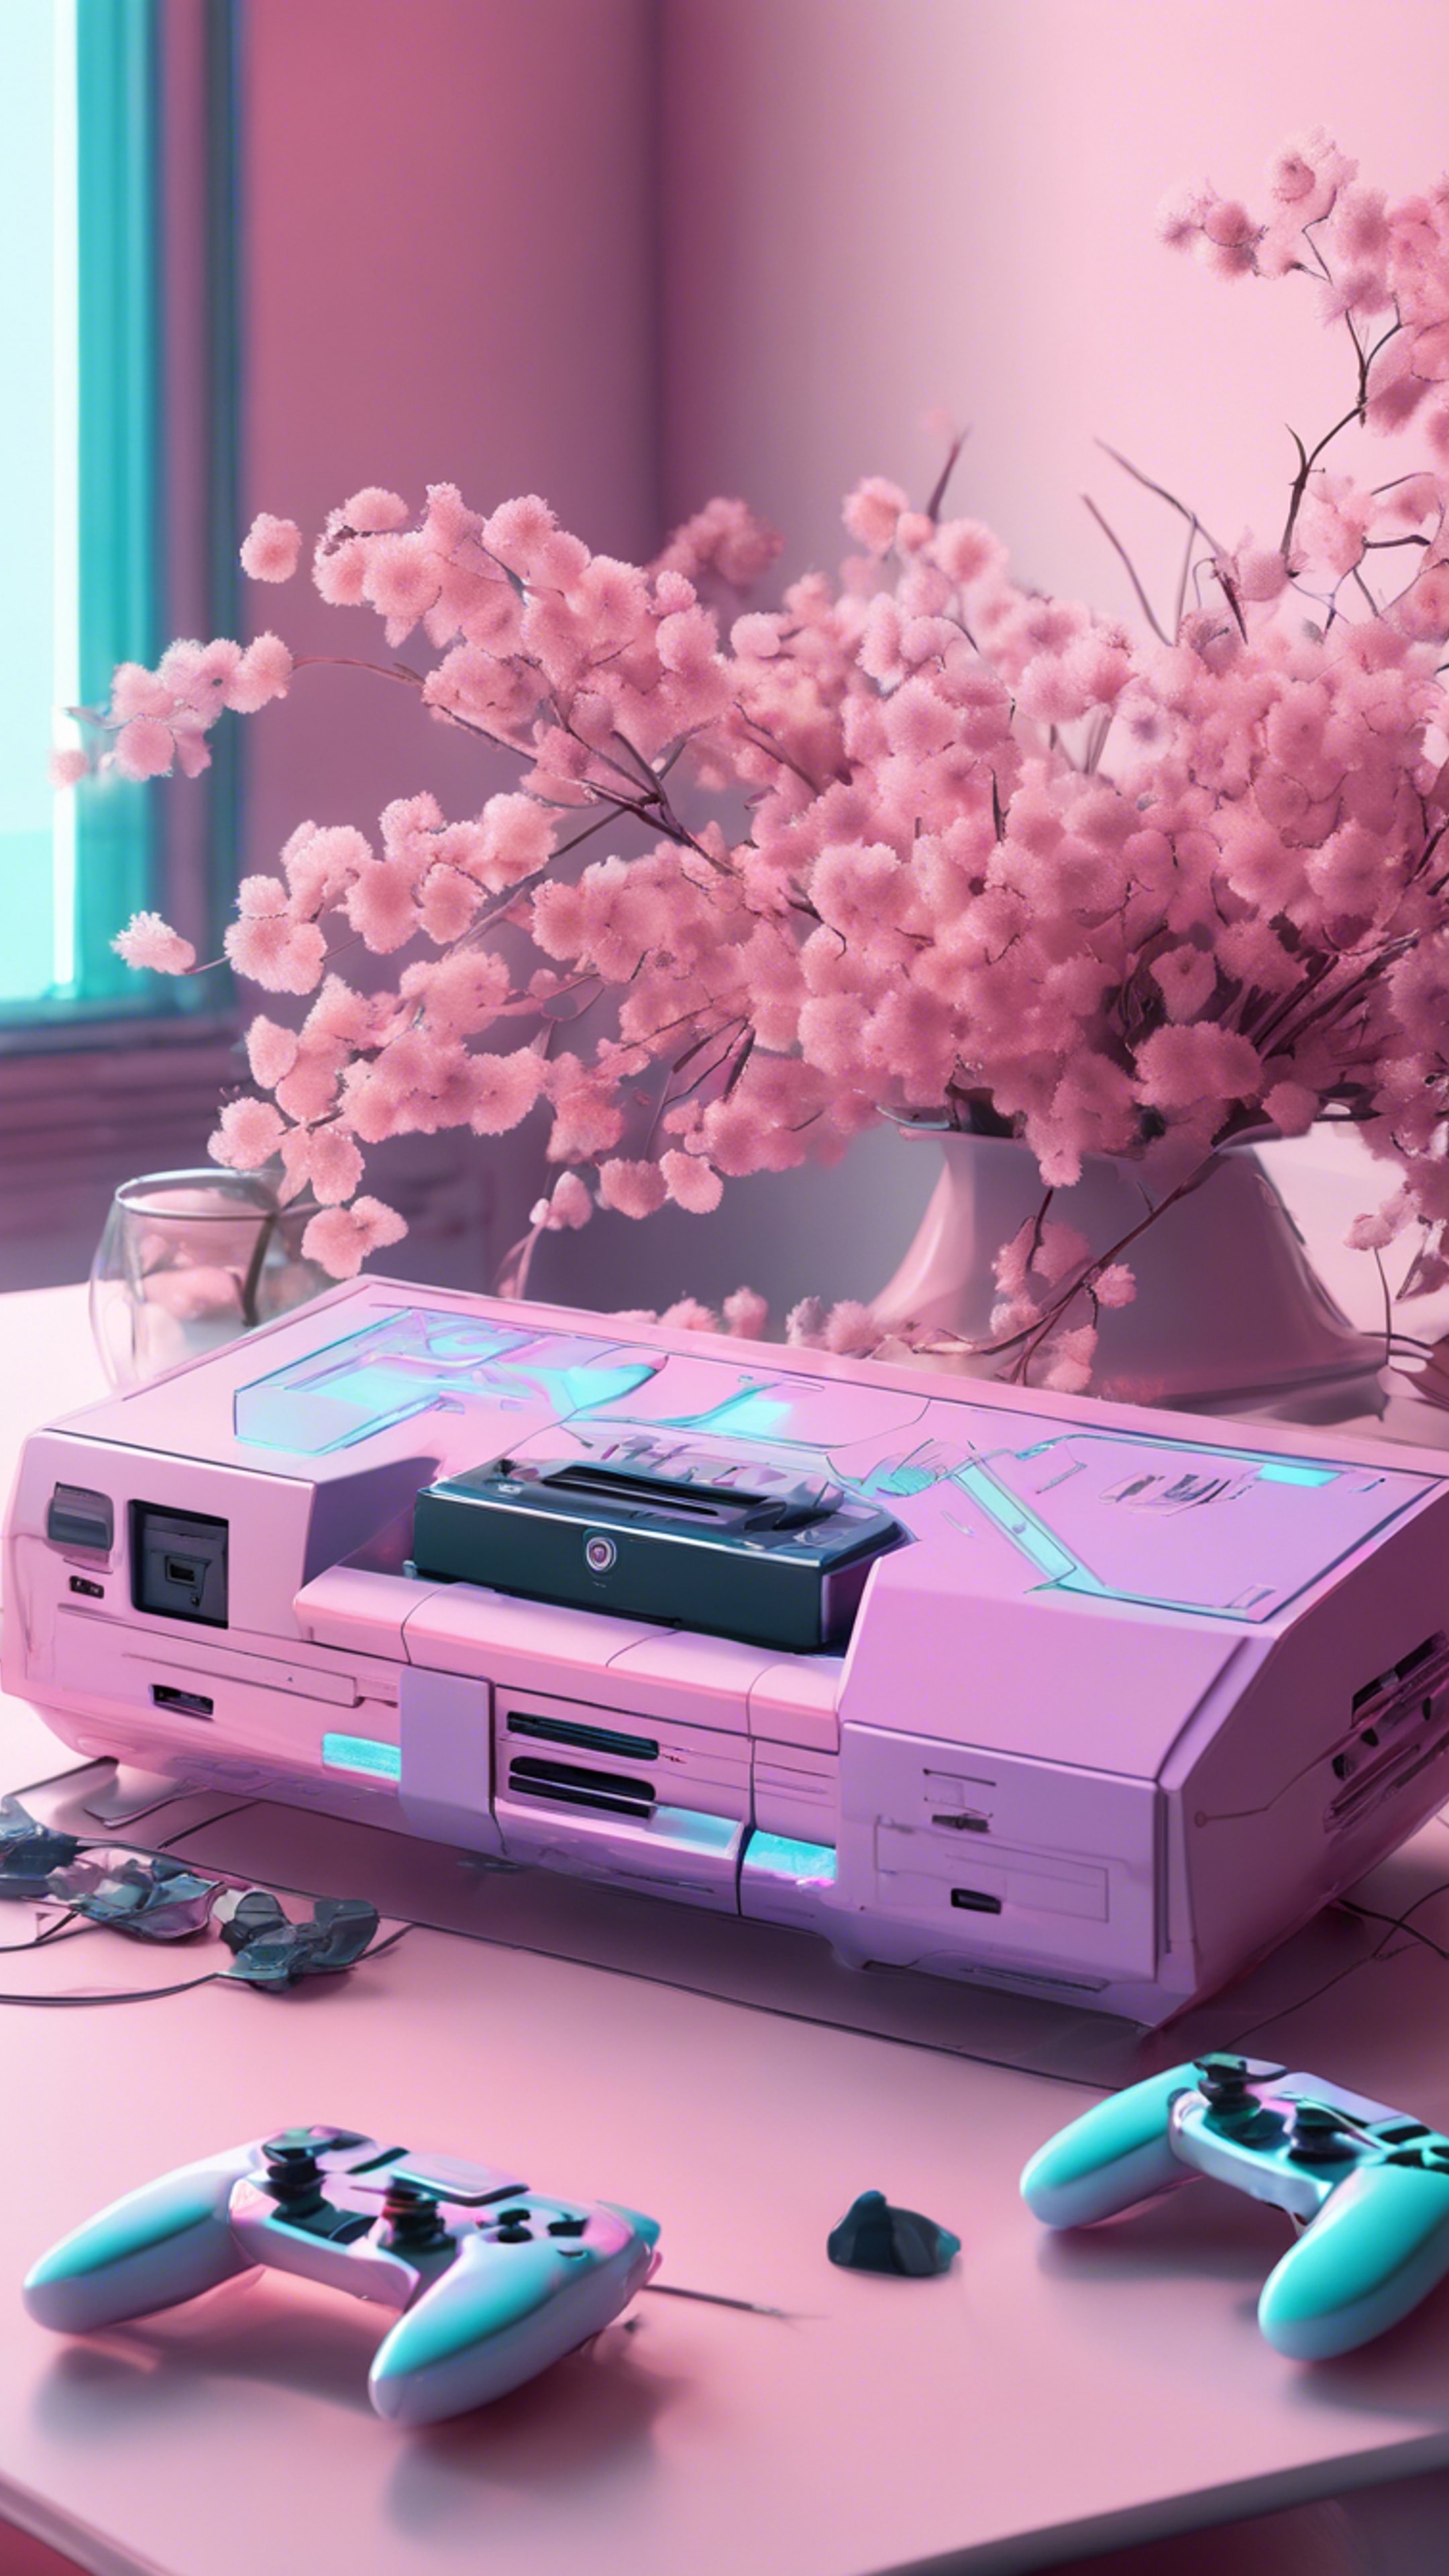 A pastel colored gaming console on a white table next to soft colored flowers in a daylight room. วอลล์เปเปอร์[43bf14bcce304acdbb24]